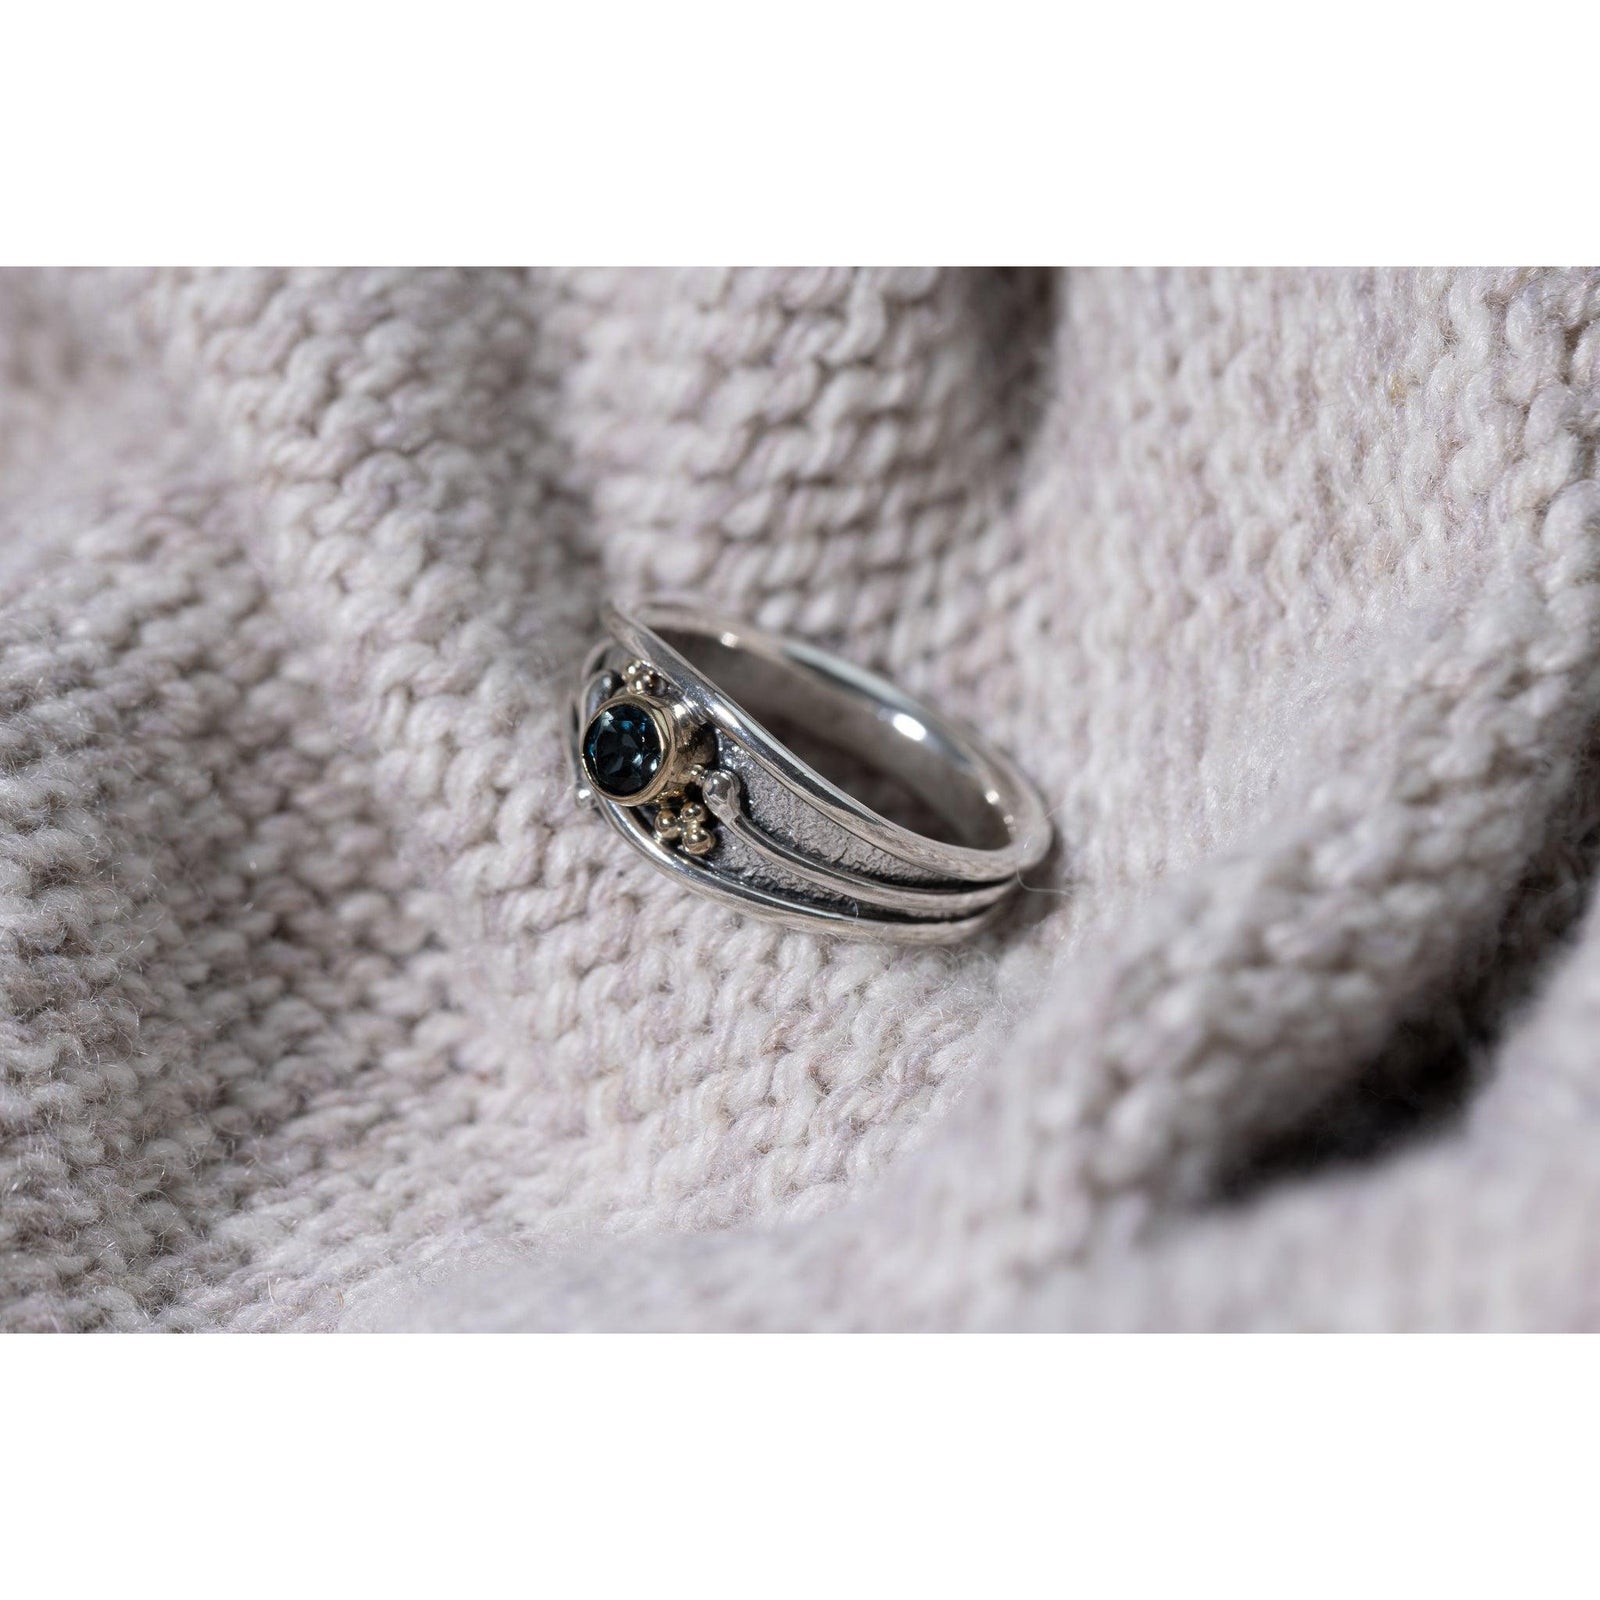 'LG65 - Silver Ring with 9ct Gold 4mm London Blue Topaz Ring ' by Les Grimshaw, available at Padstow Gallery, Cornwall